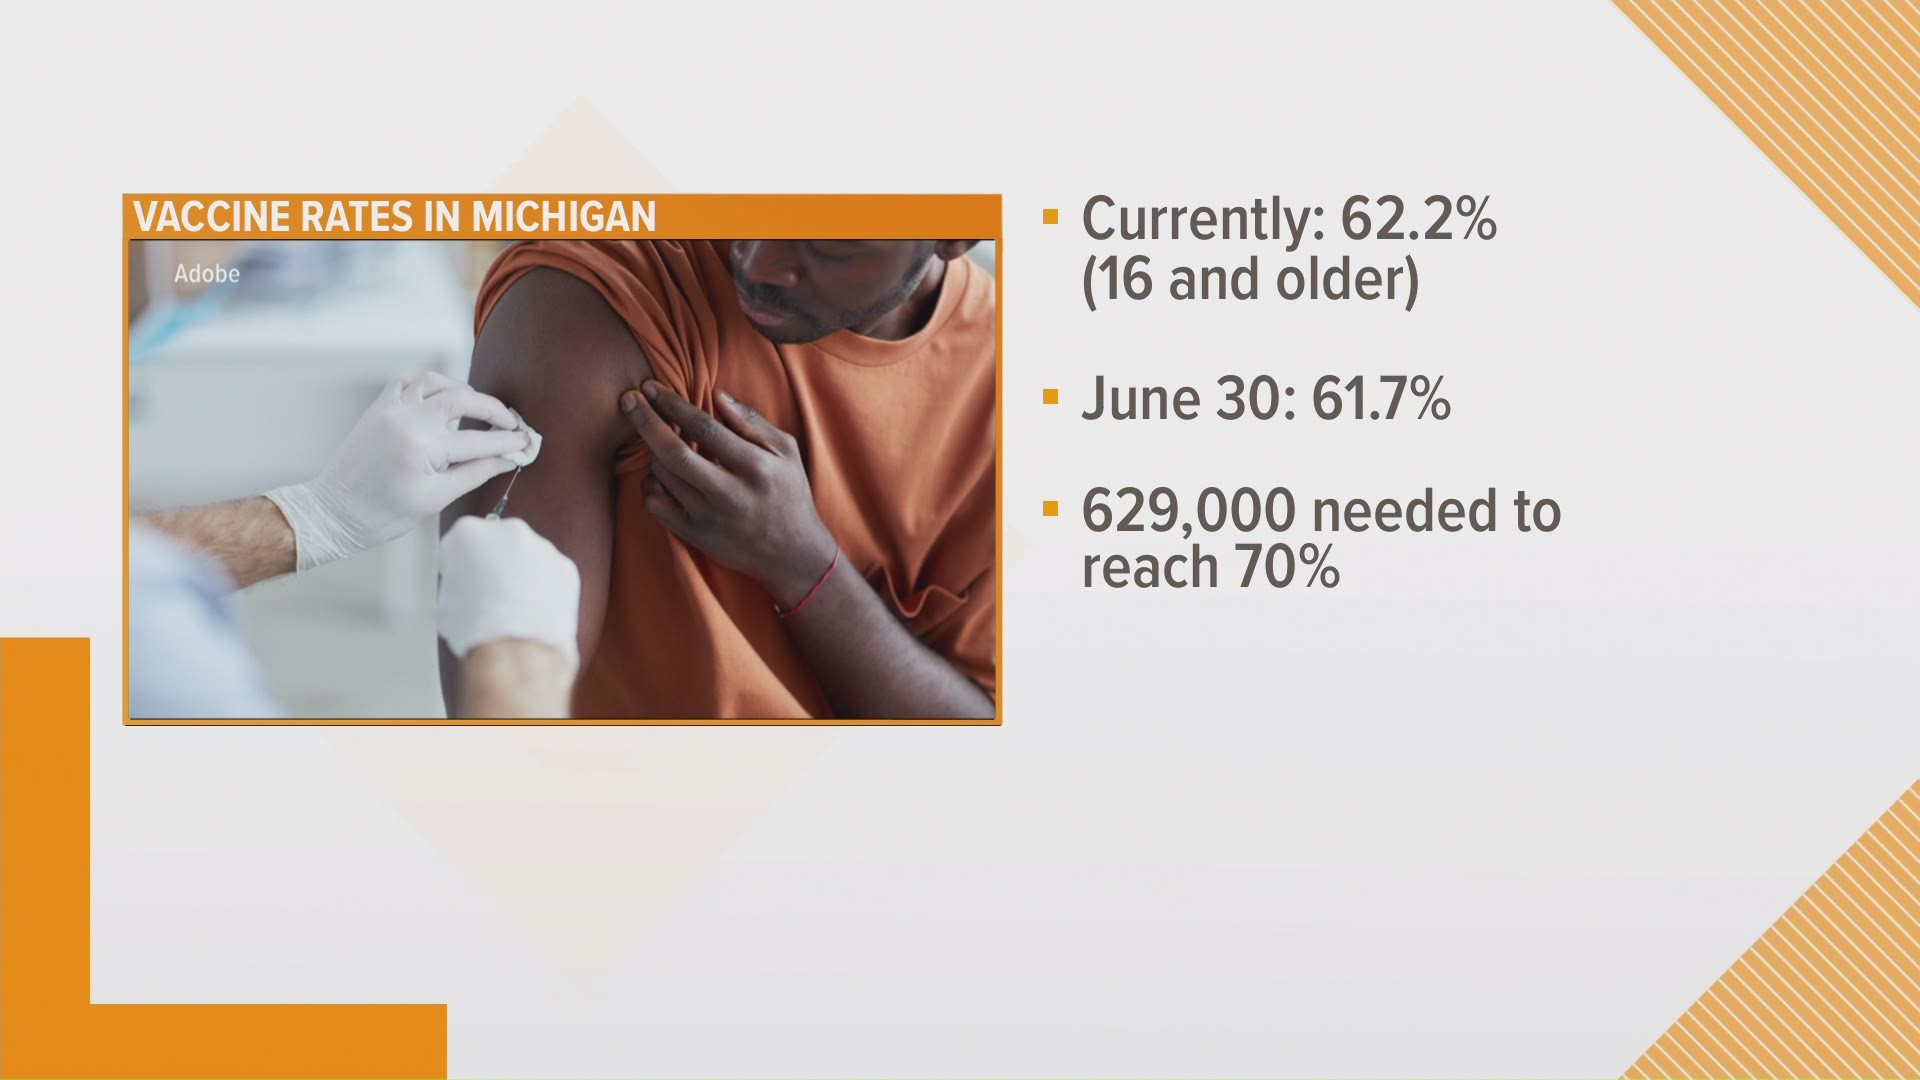 The goal of the program is to get 70% of Michiganders vaccinated.